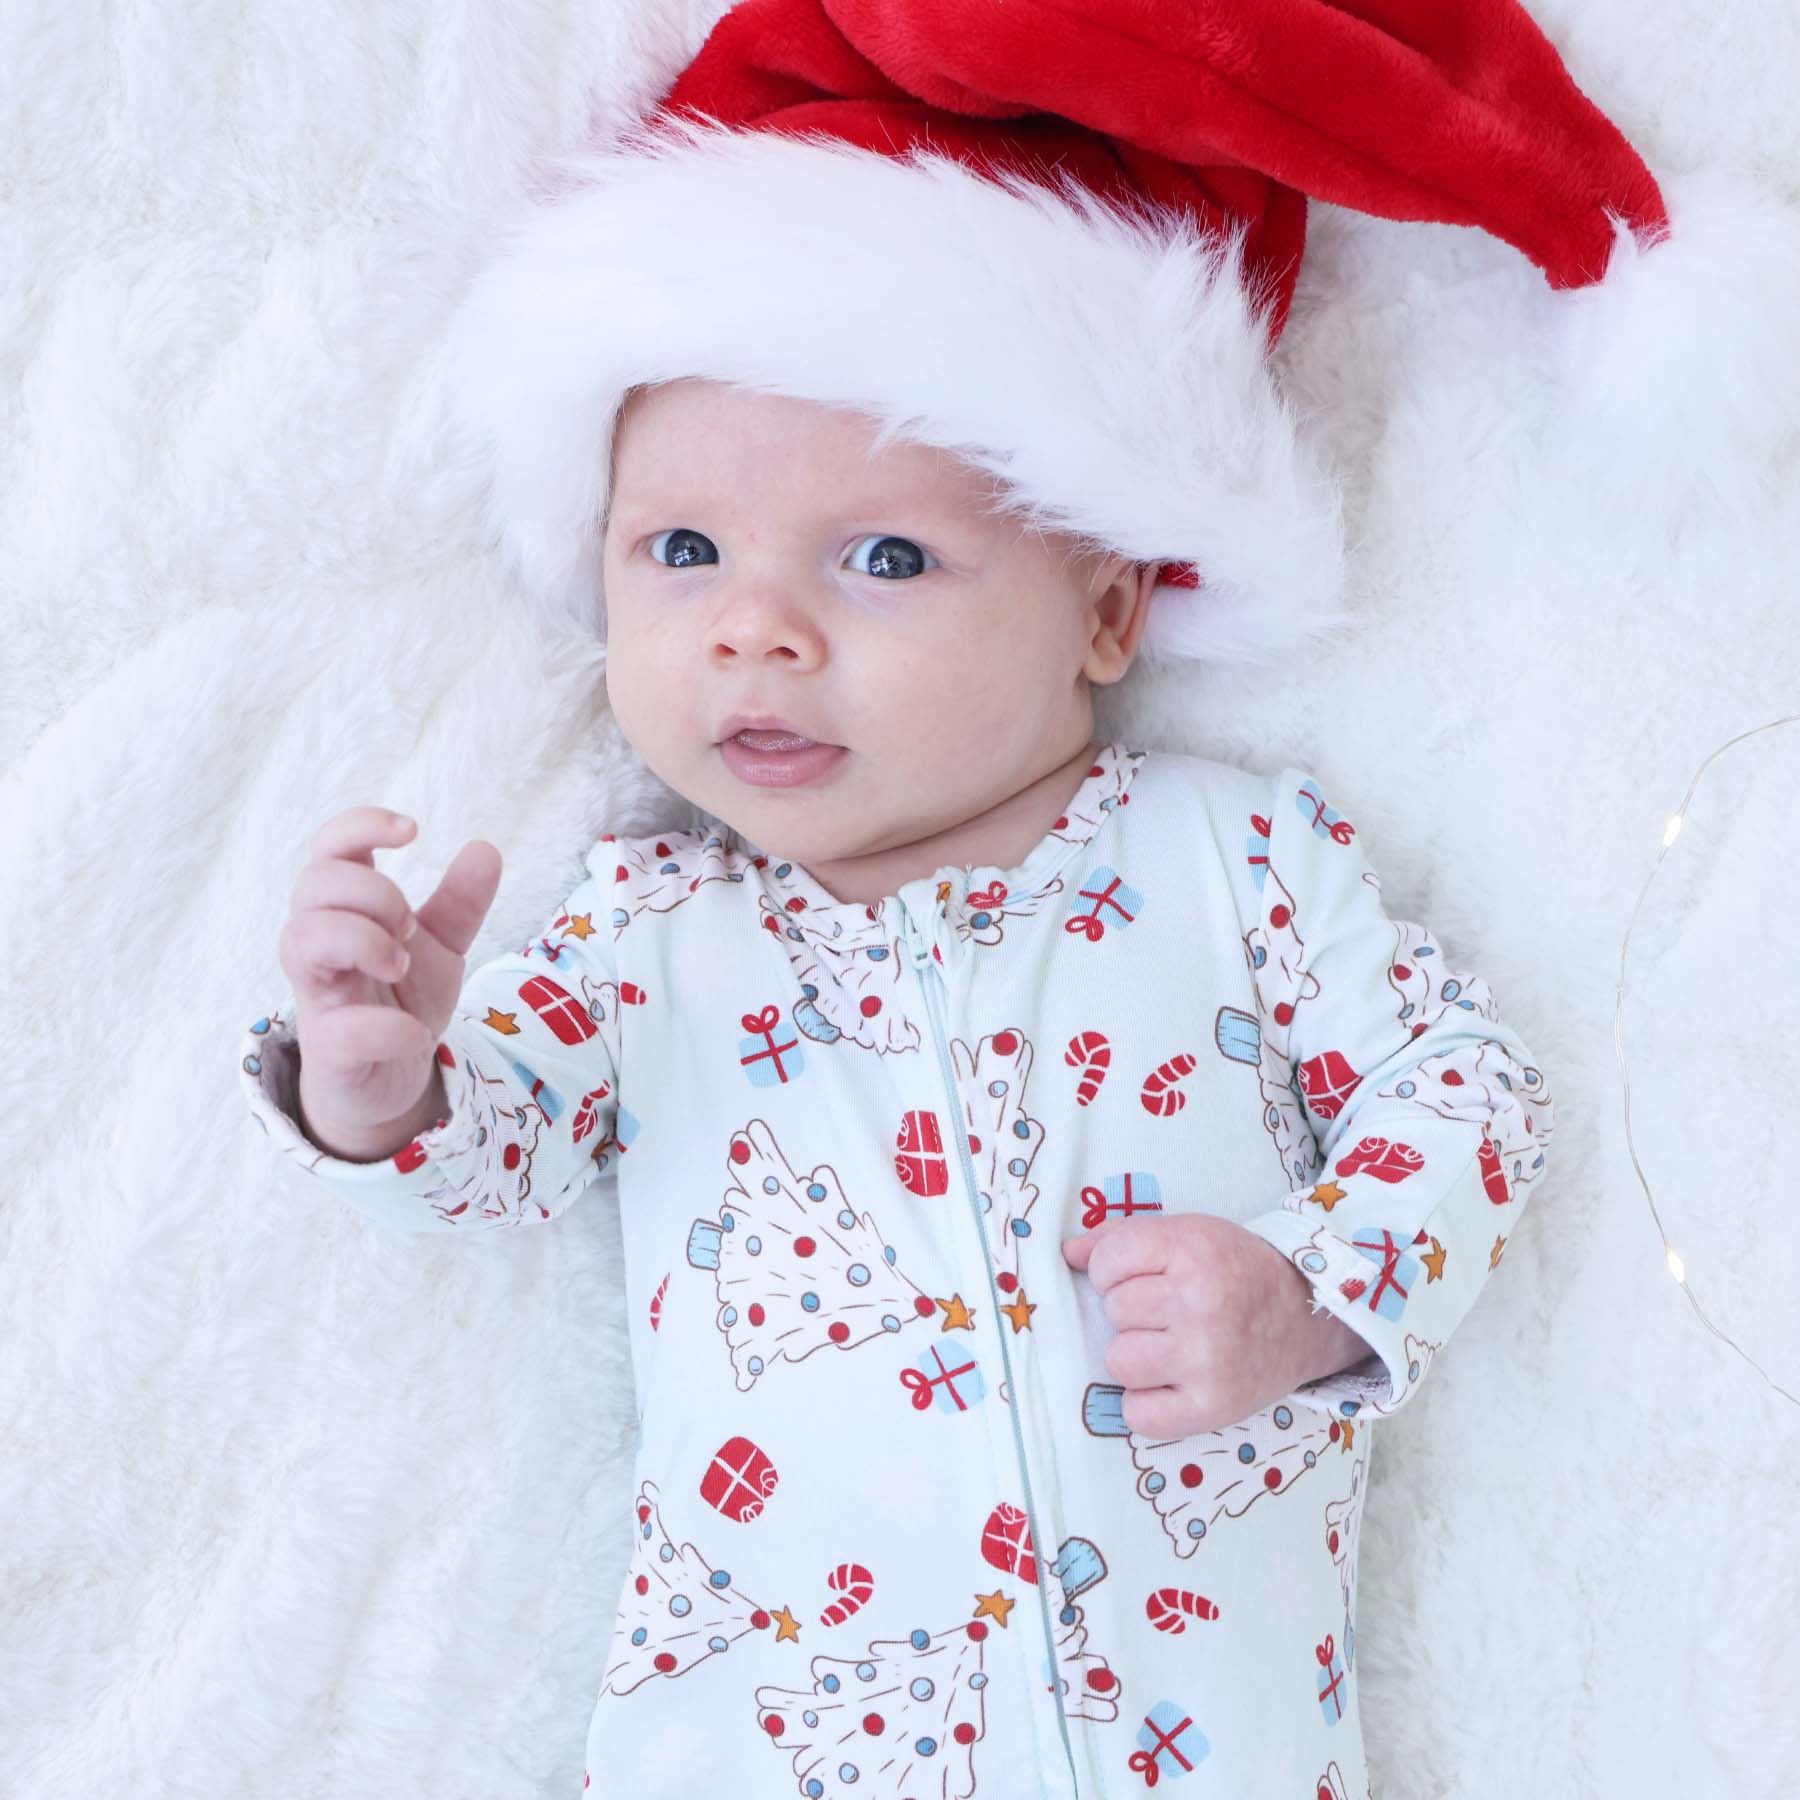 Best Selling Gifts for Babies | Black Friday Sale